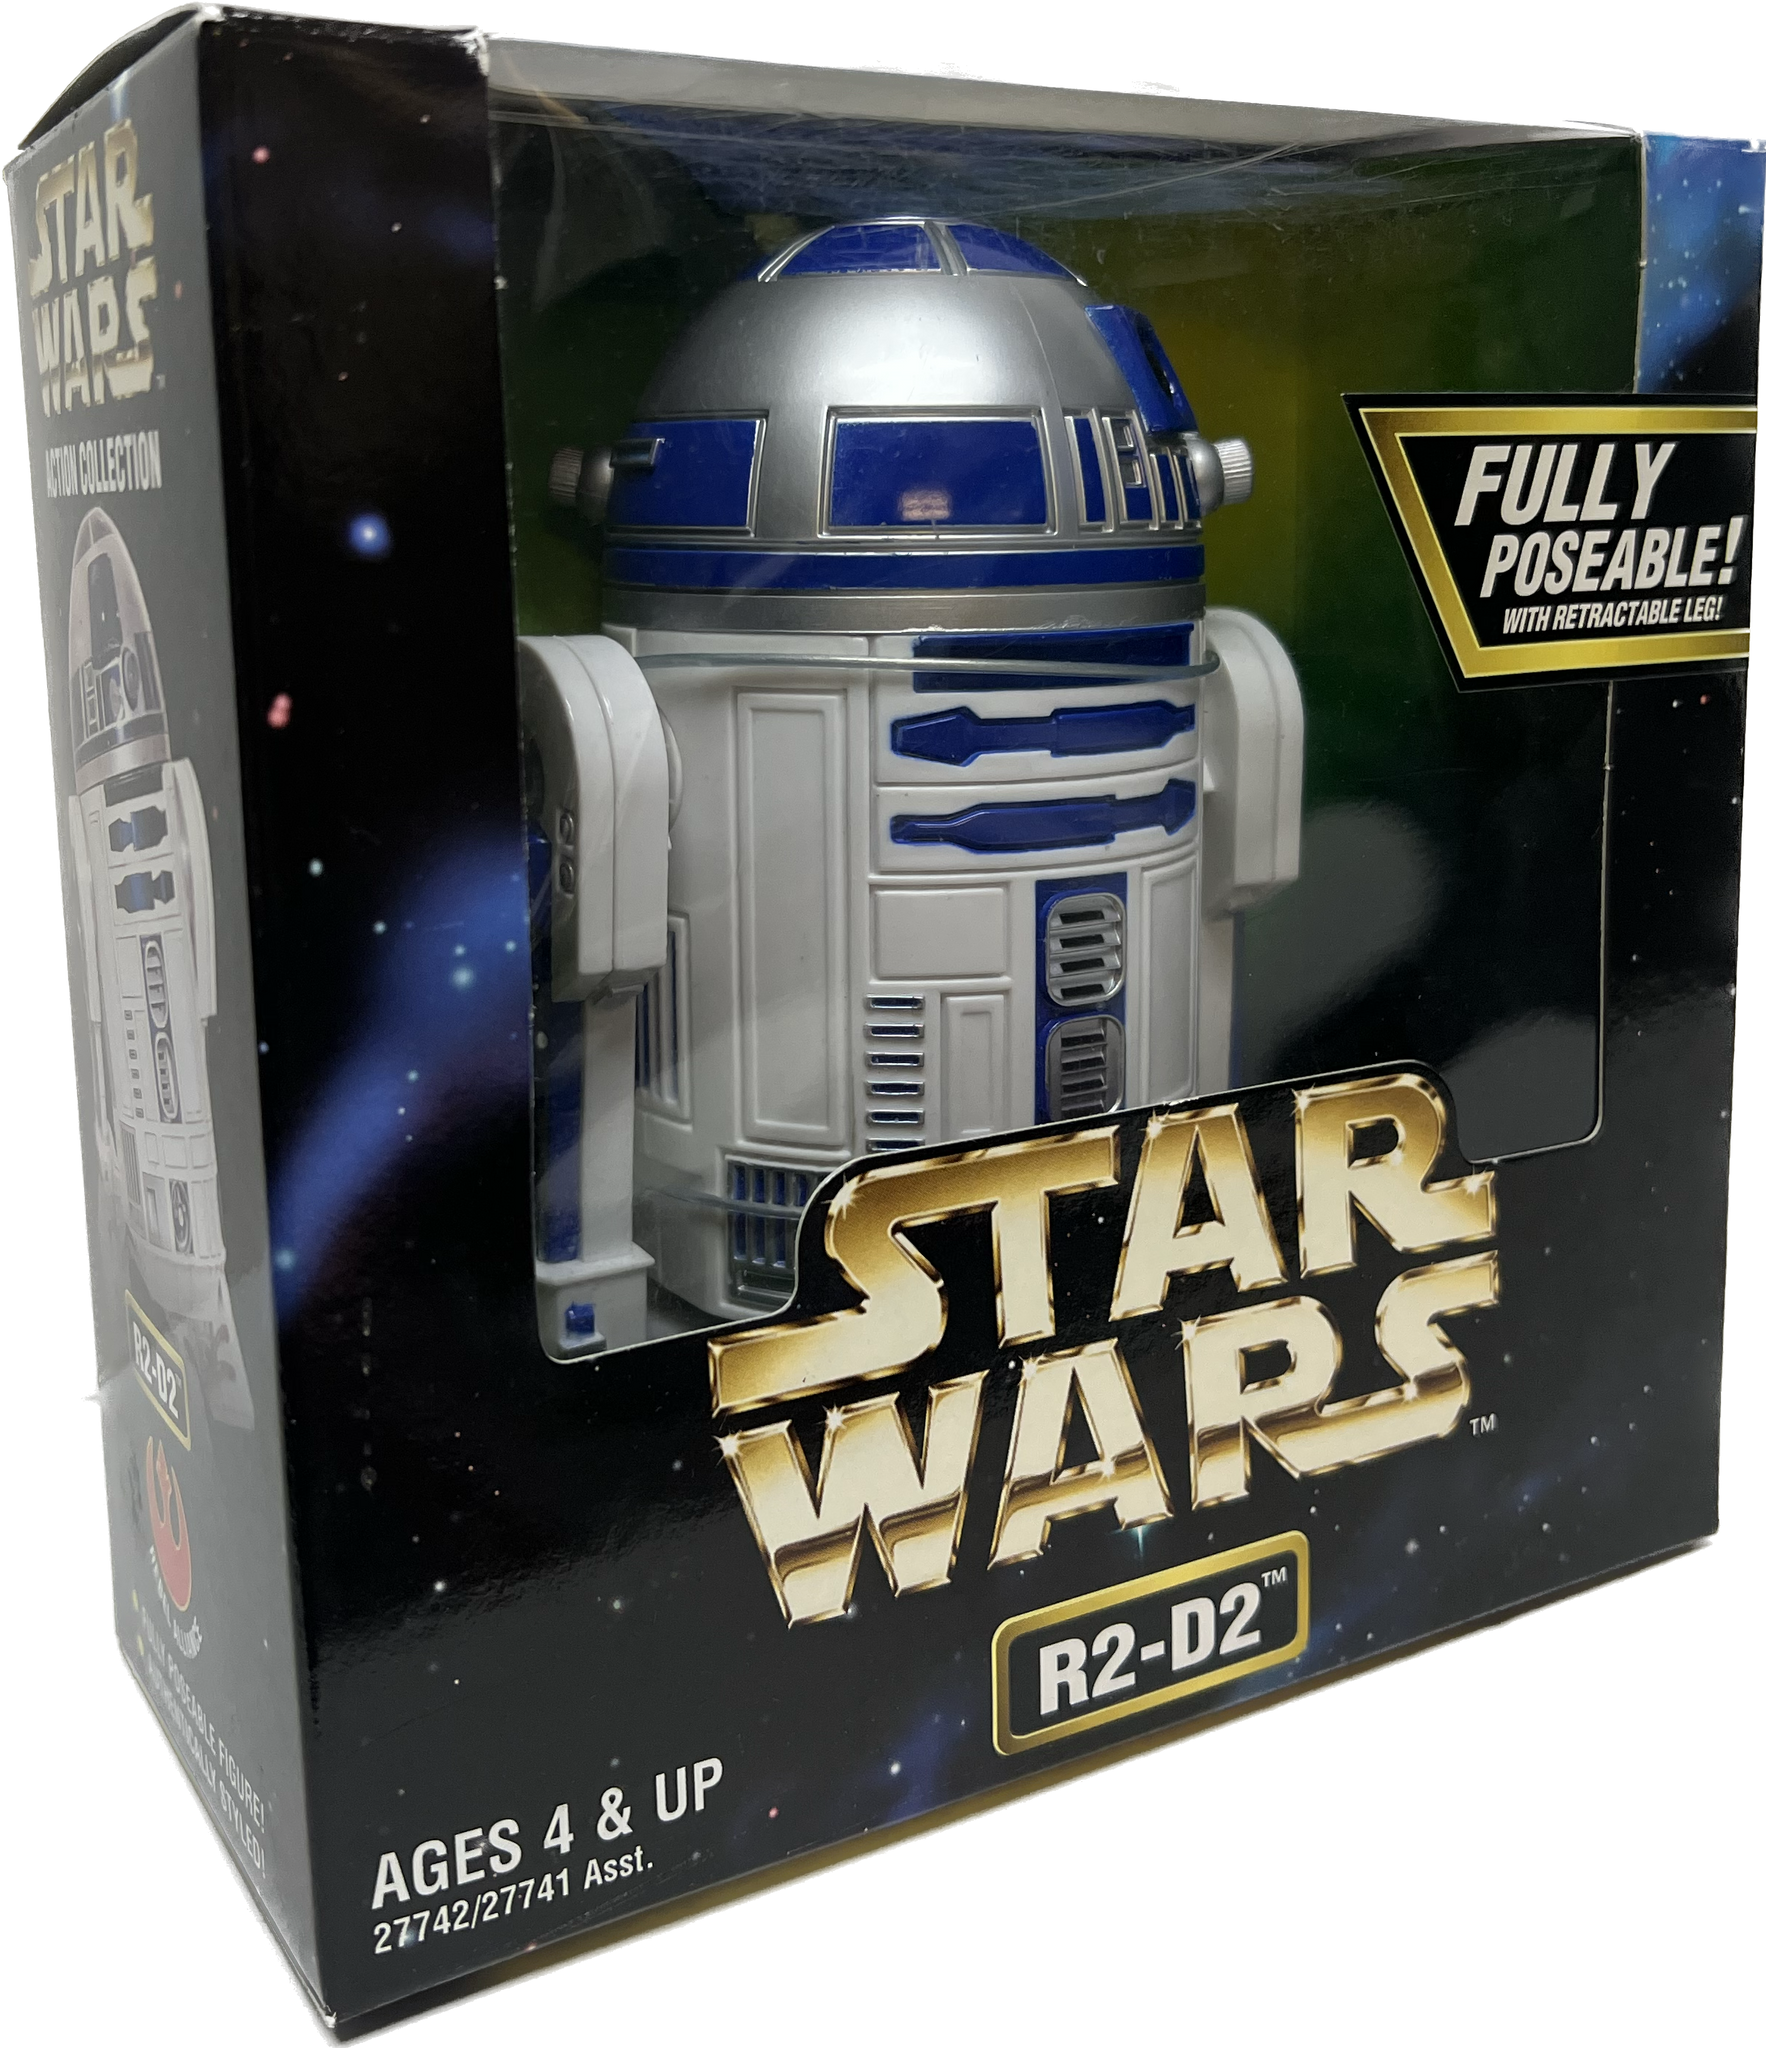 Star Wars Action Collection 12" Scale R2 D2